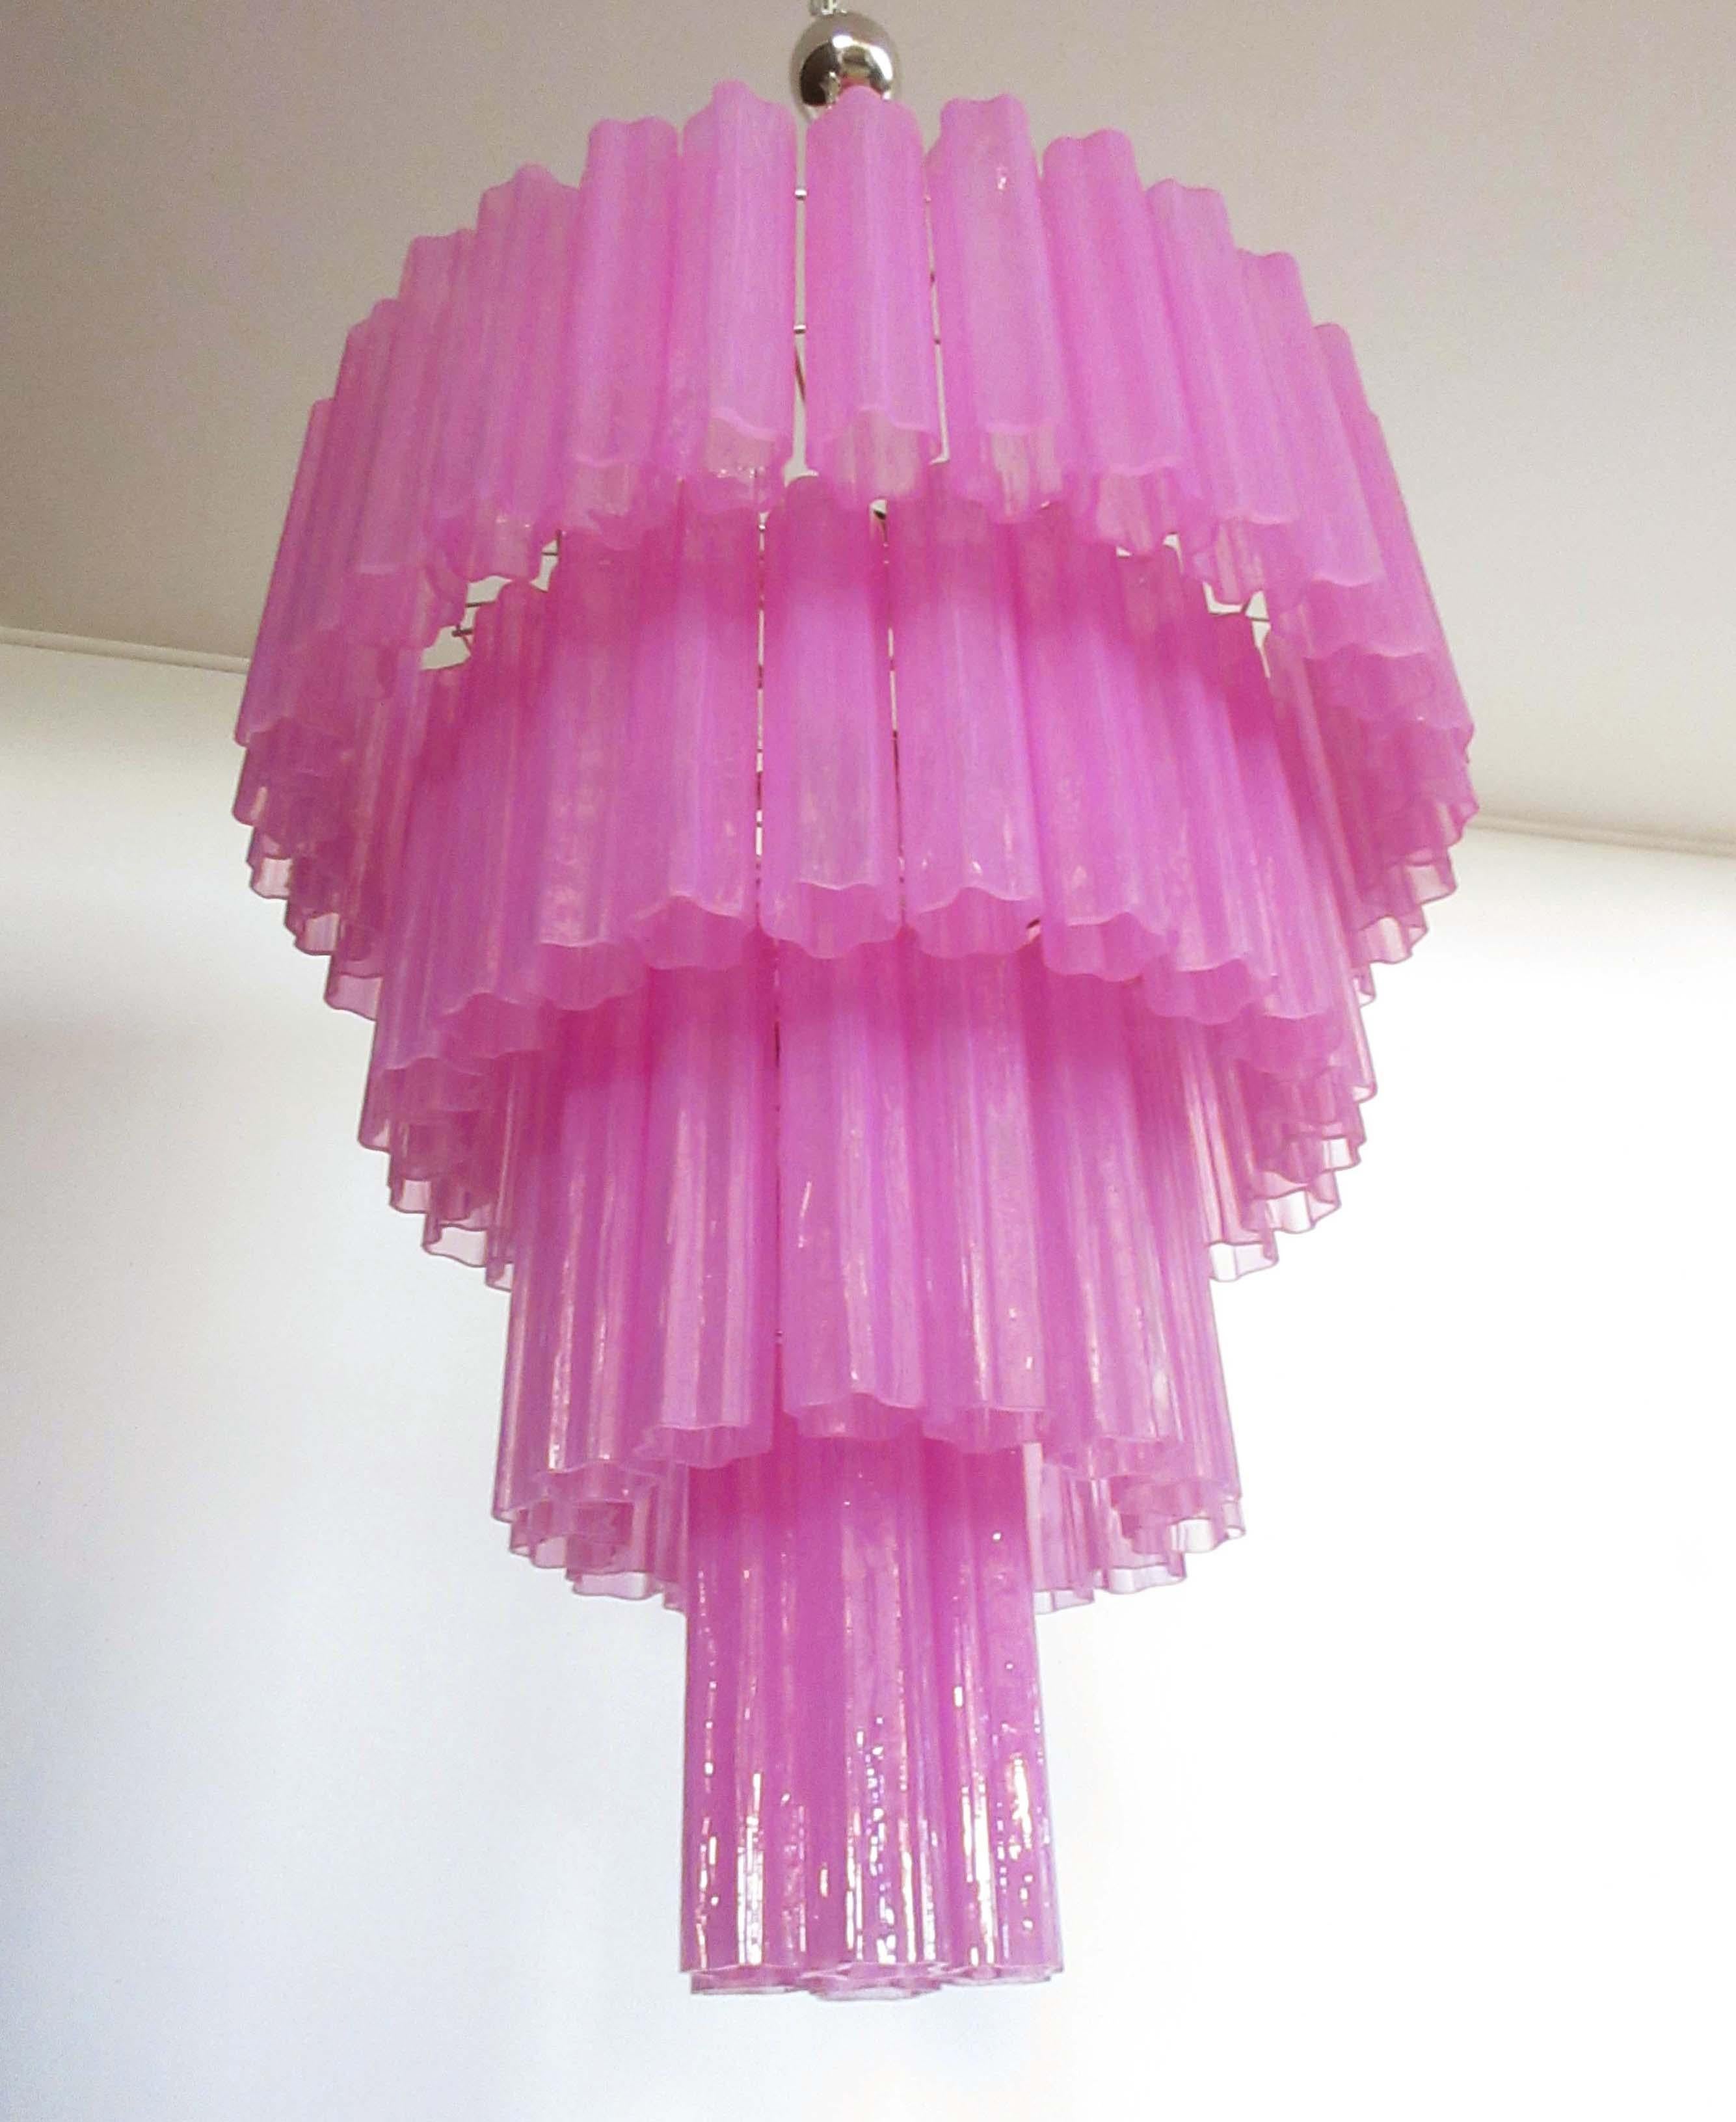 Huge Vintage Murano Glass Tiered Chandelier, 78 Glasses, Pink Fuxia Silk For Sale 1